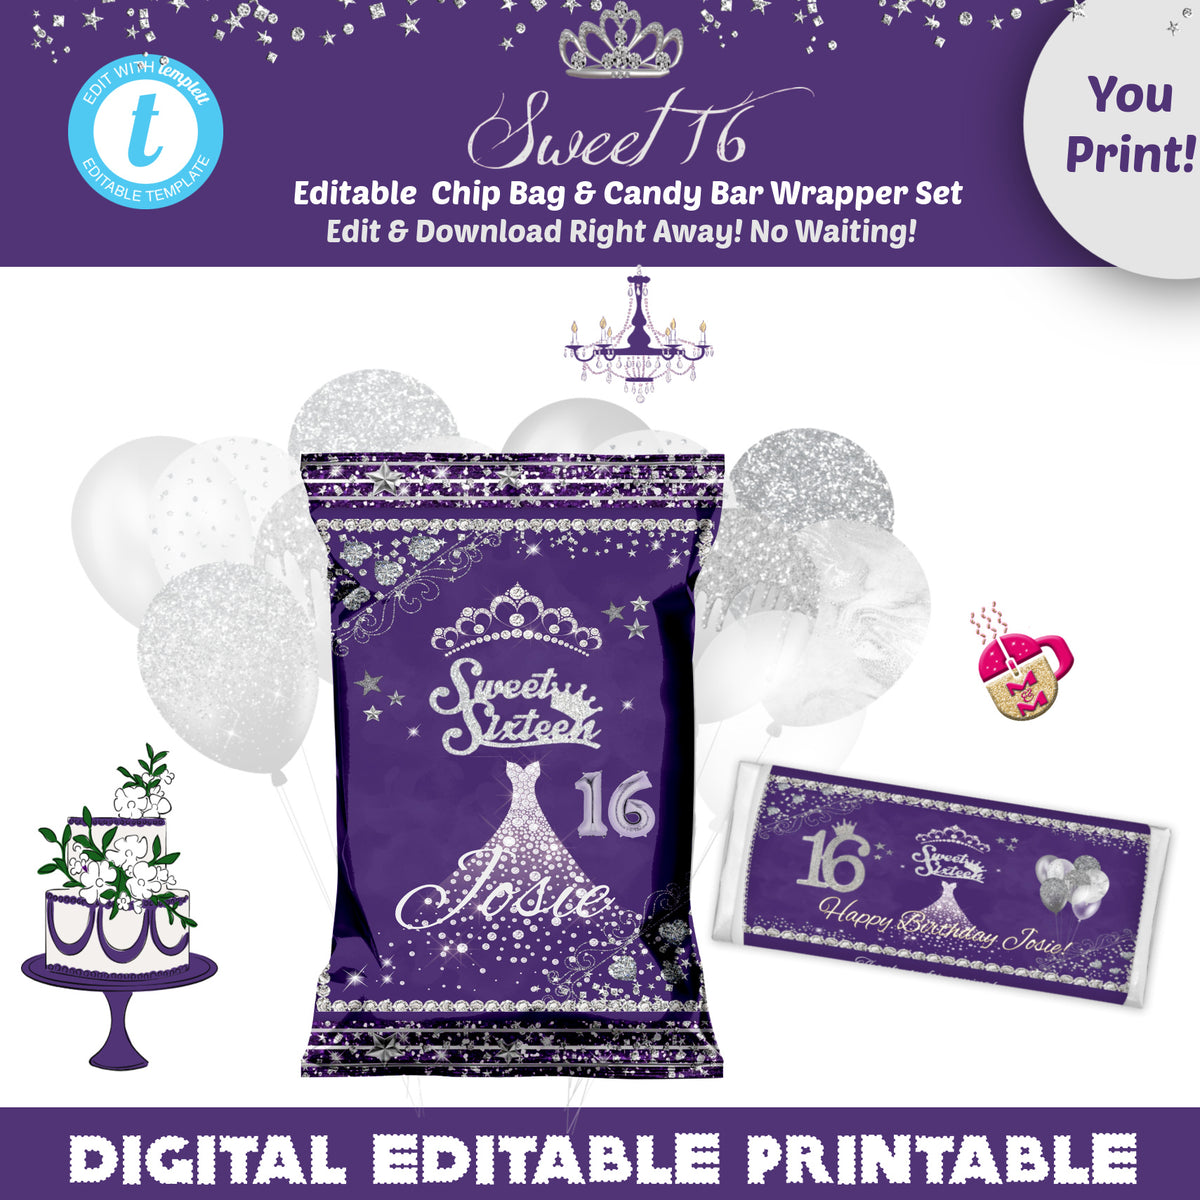 Chip bag template / Free enjoy  Birthday candy bar wrappers